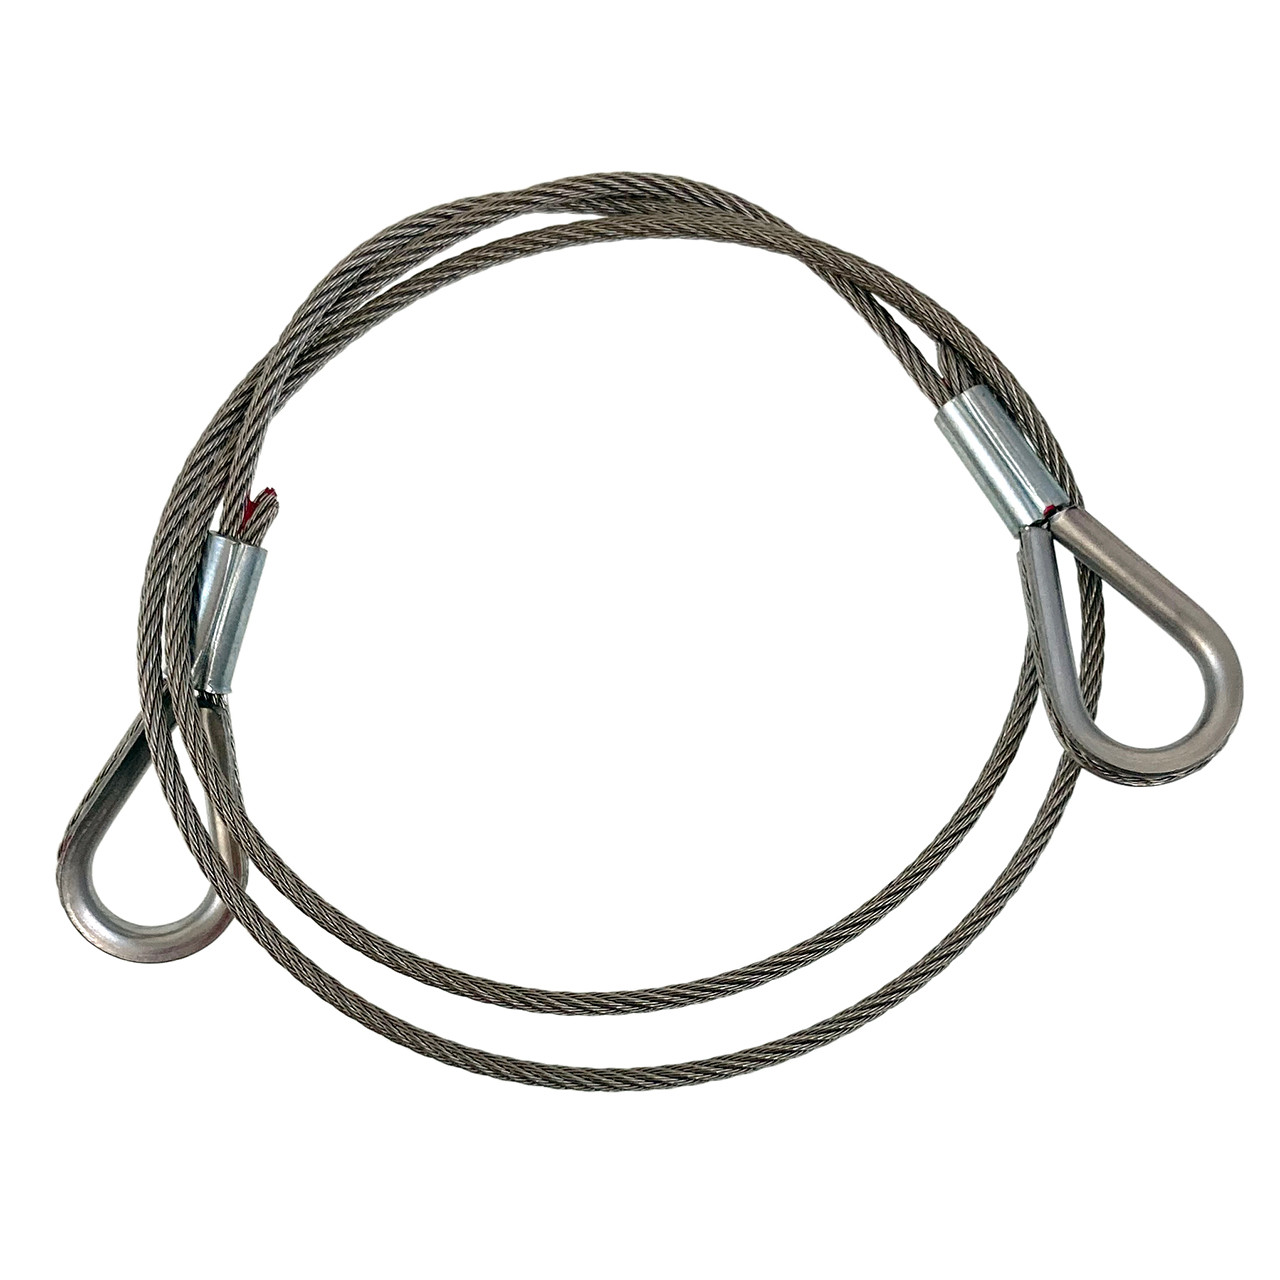 U40123-081   UNIVAIR BUNGEE CABLE - FITS PIPER